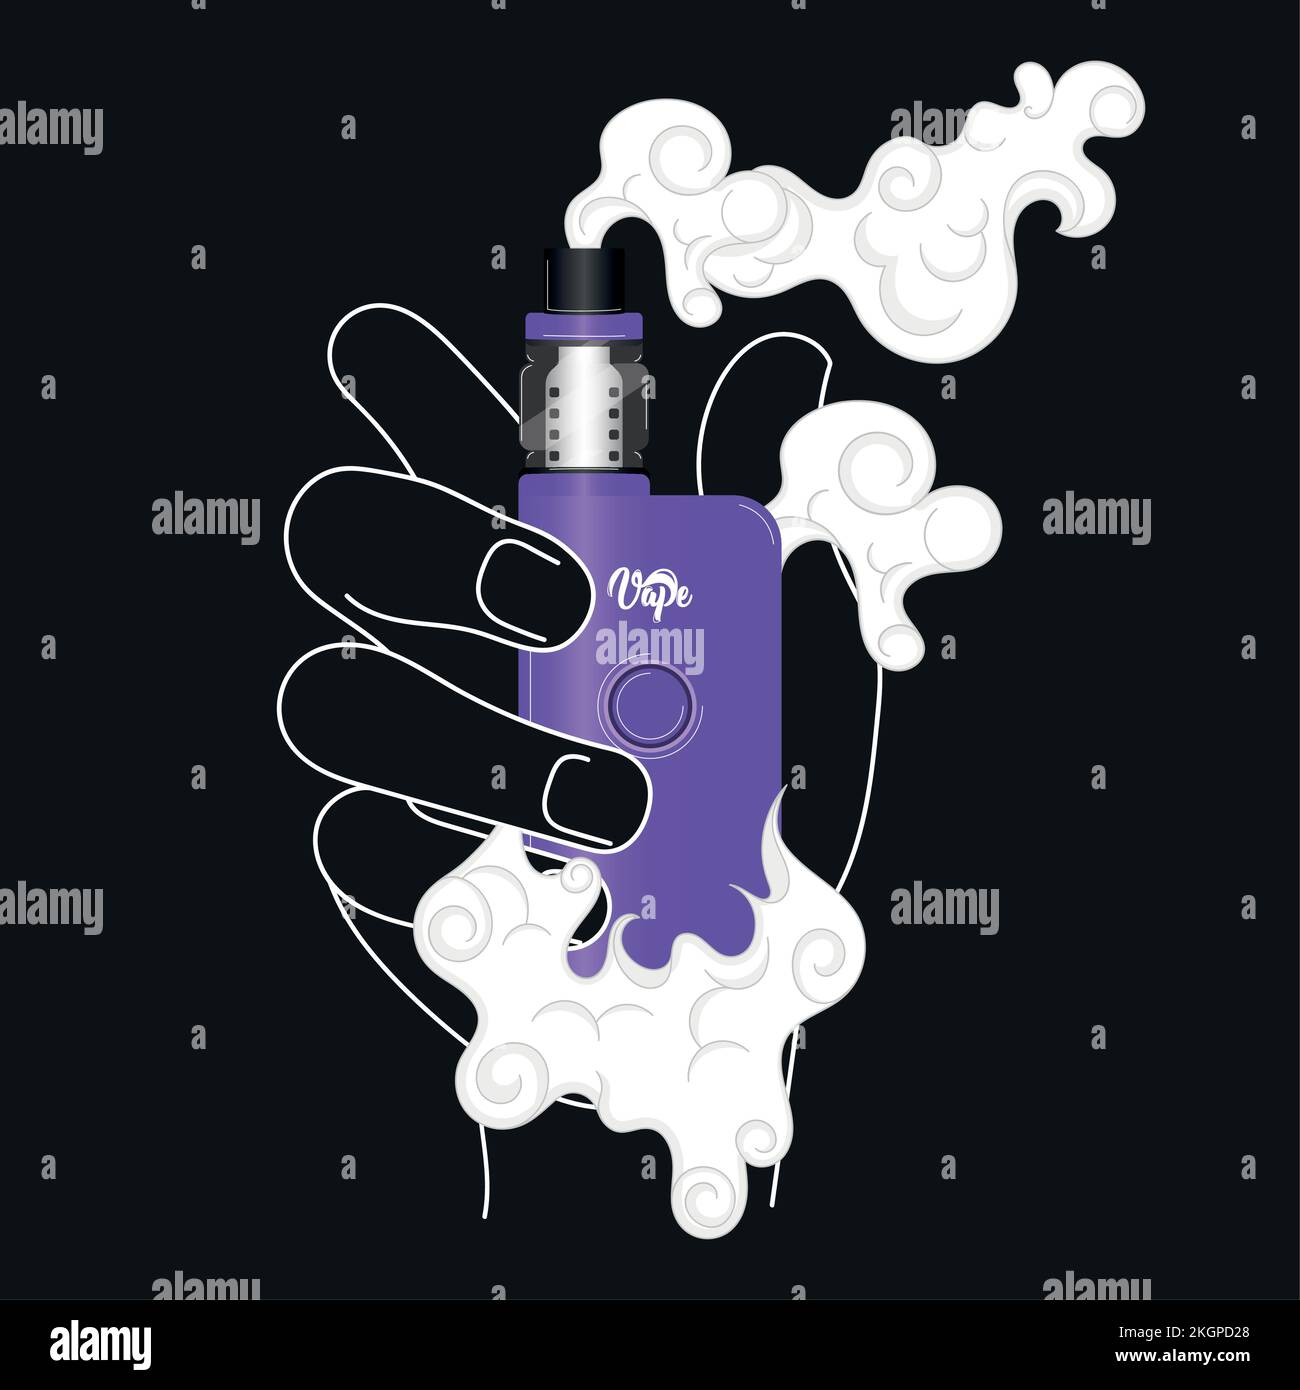 Hand holding a purple electronic cigarette icon Vector Stock Vector